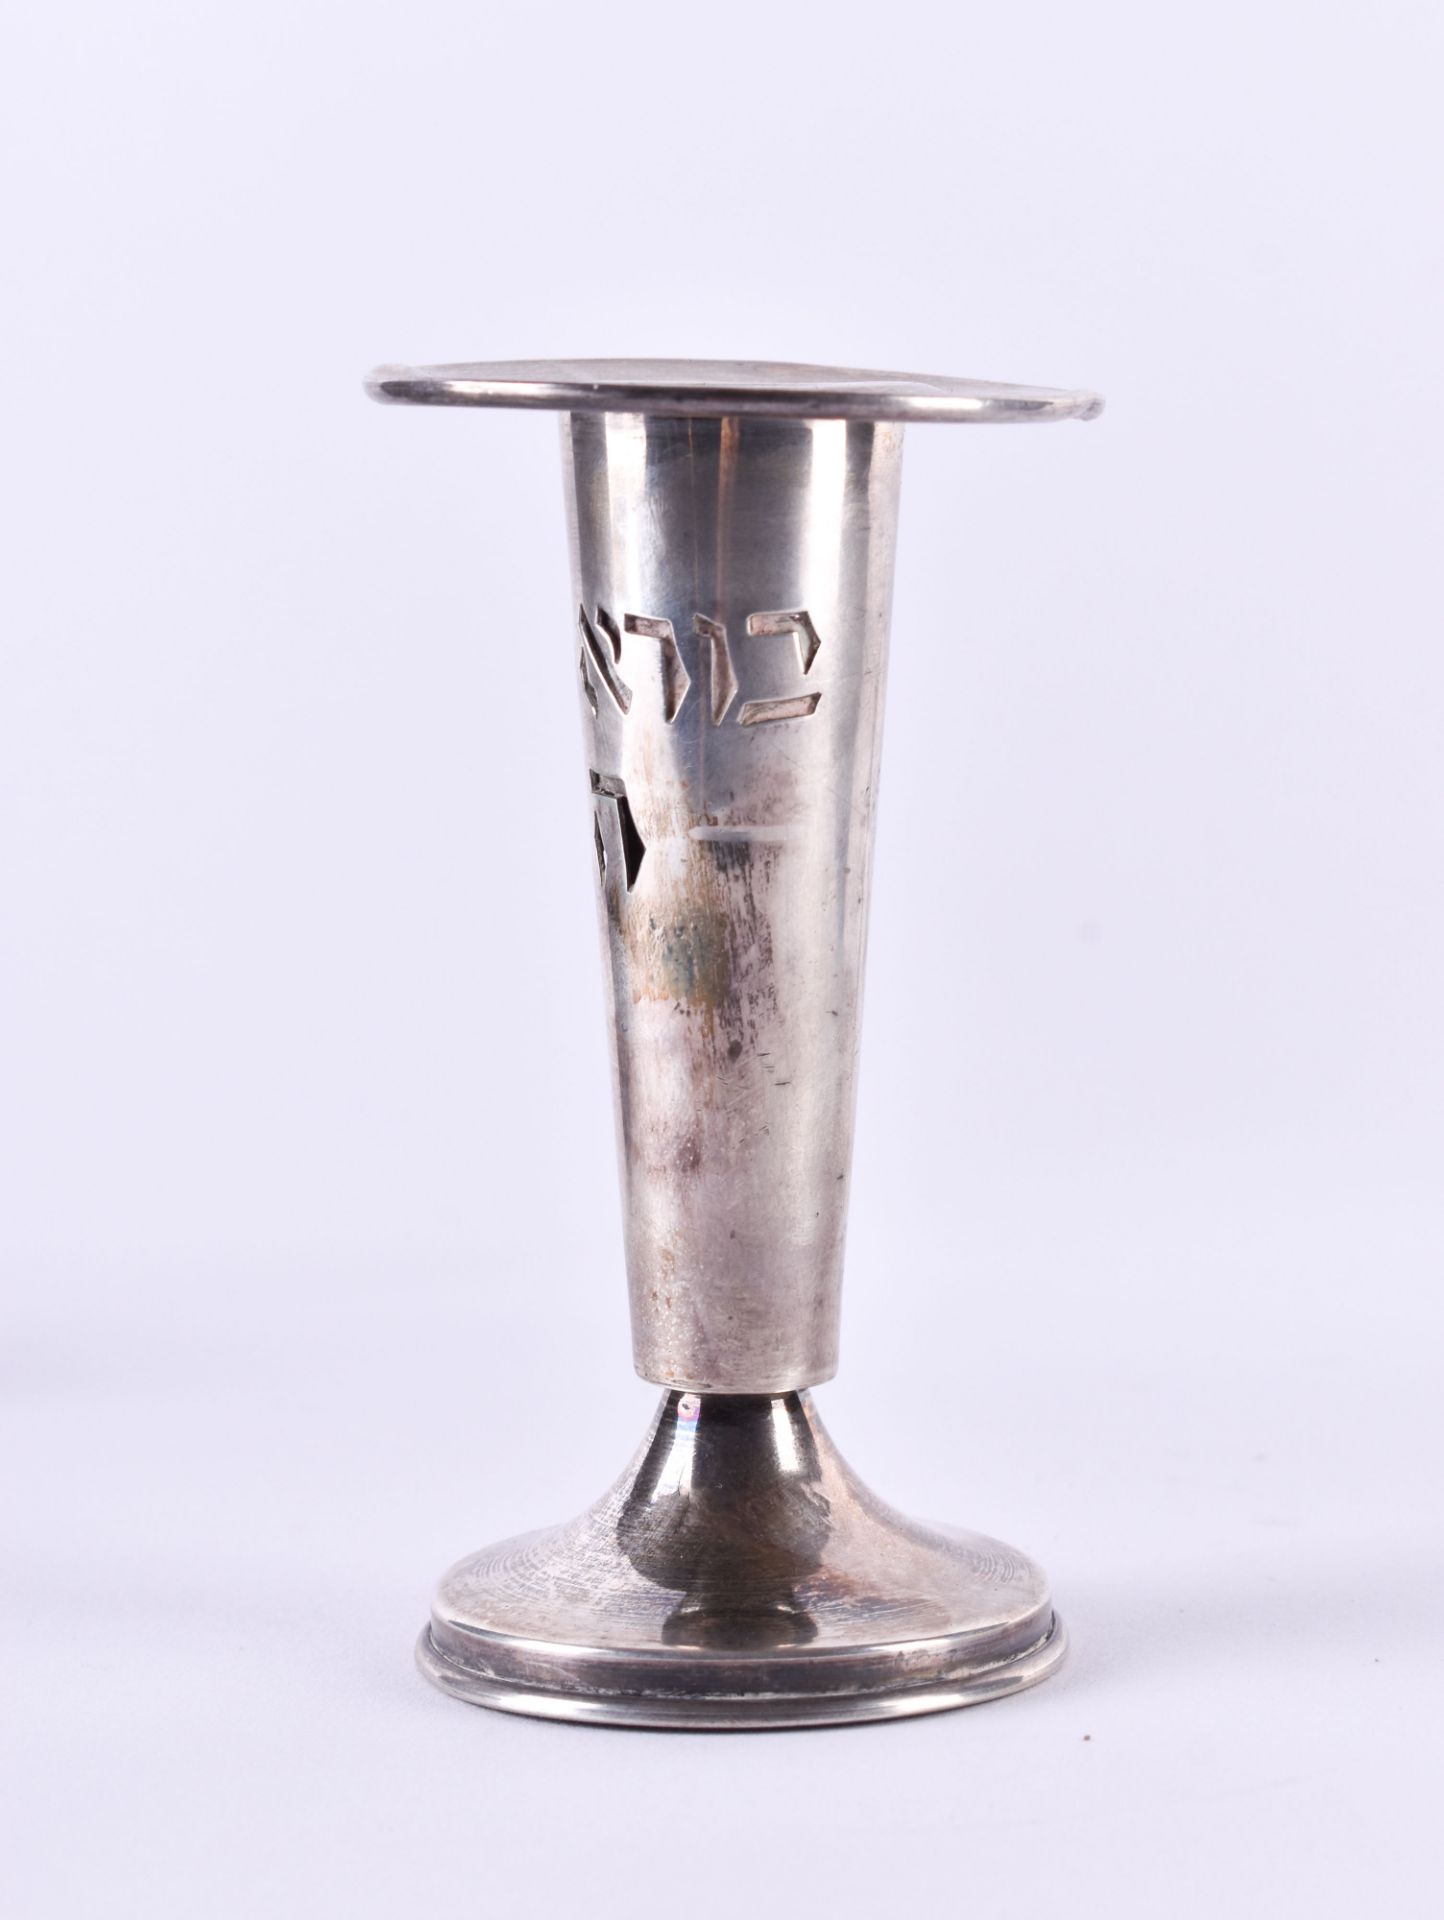 Silver candlestick Judaica - Image 3 of 4